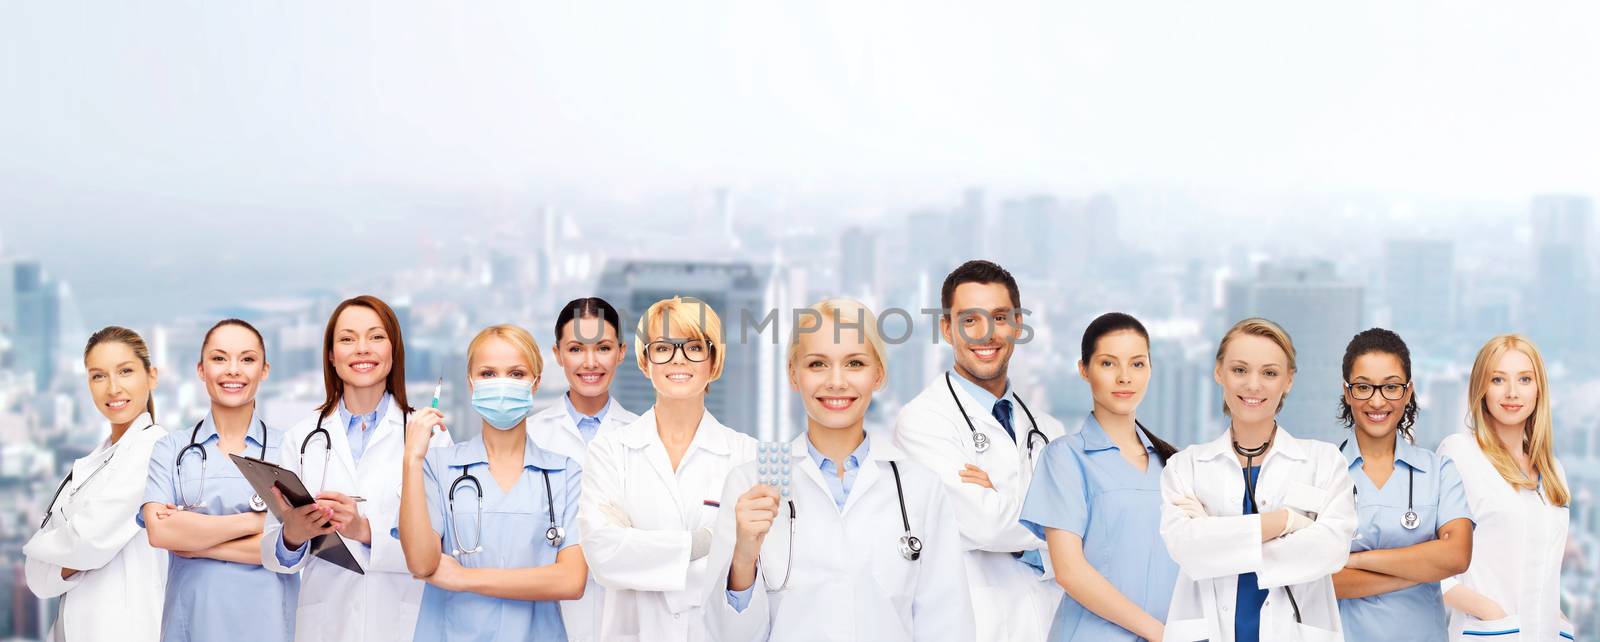 healthcare and medicine concept - smiling doctors and nurses with stethoscope